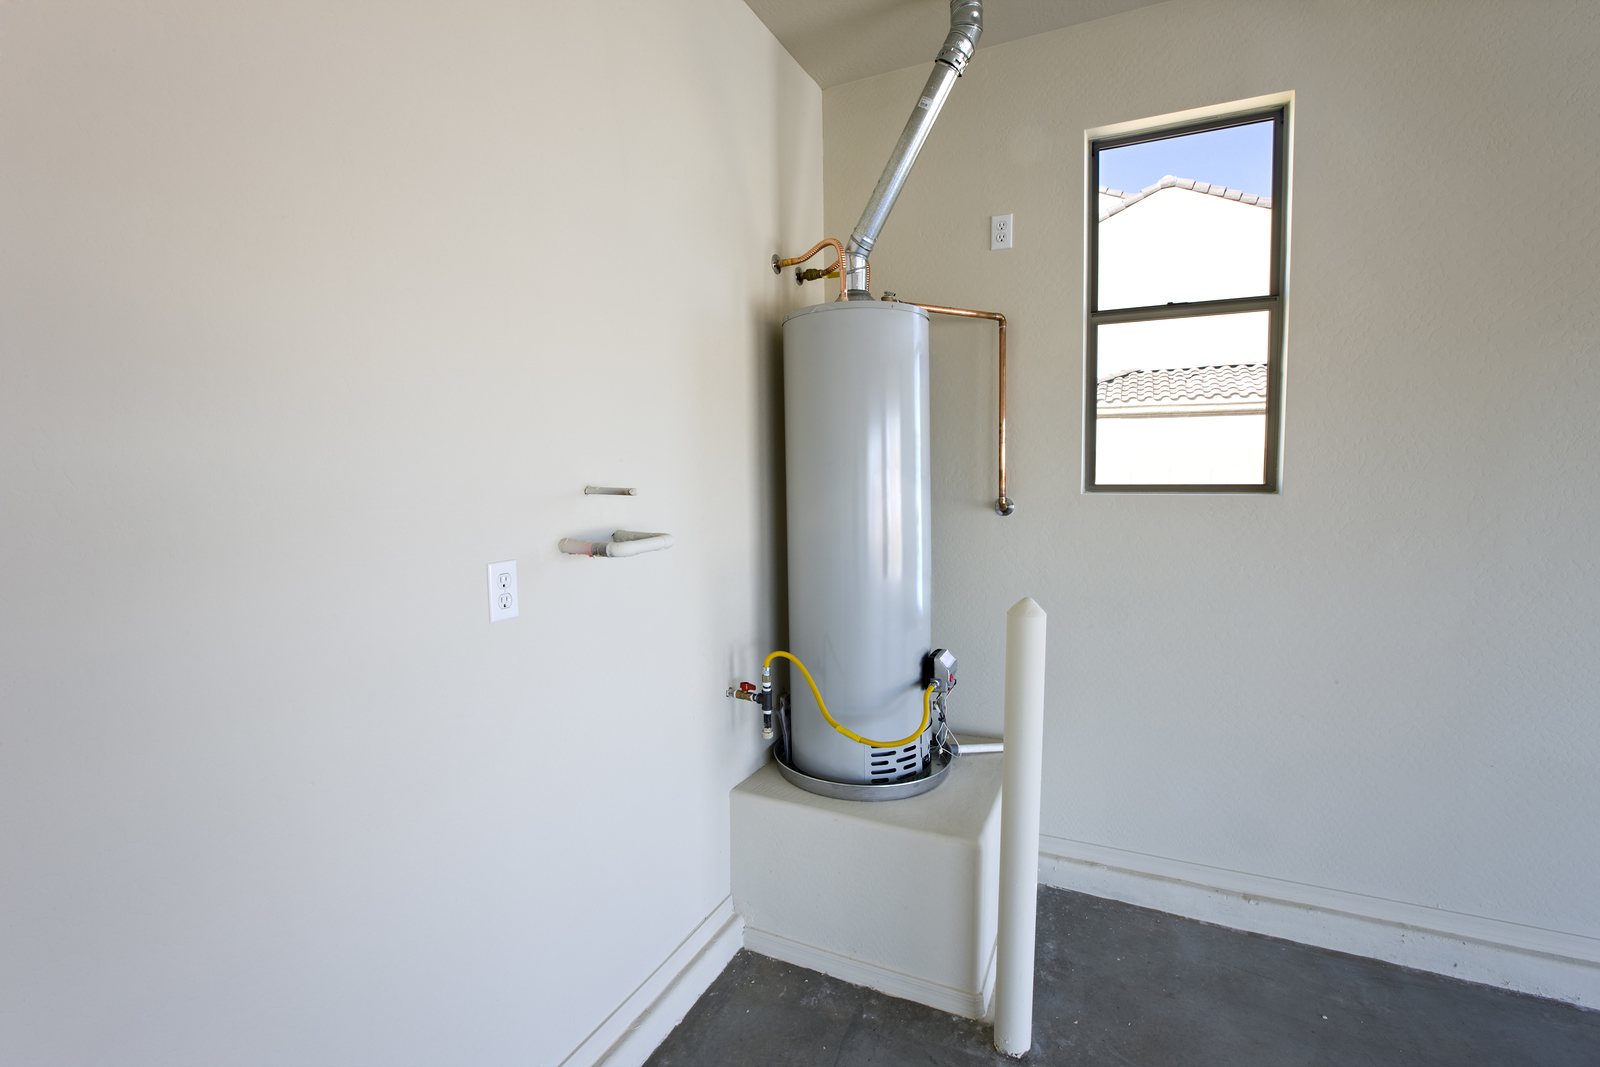 40 Gallon Gas Water Heater Image